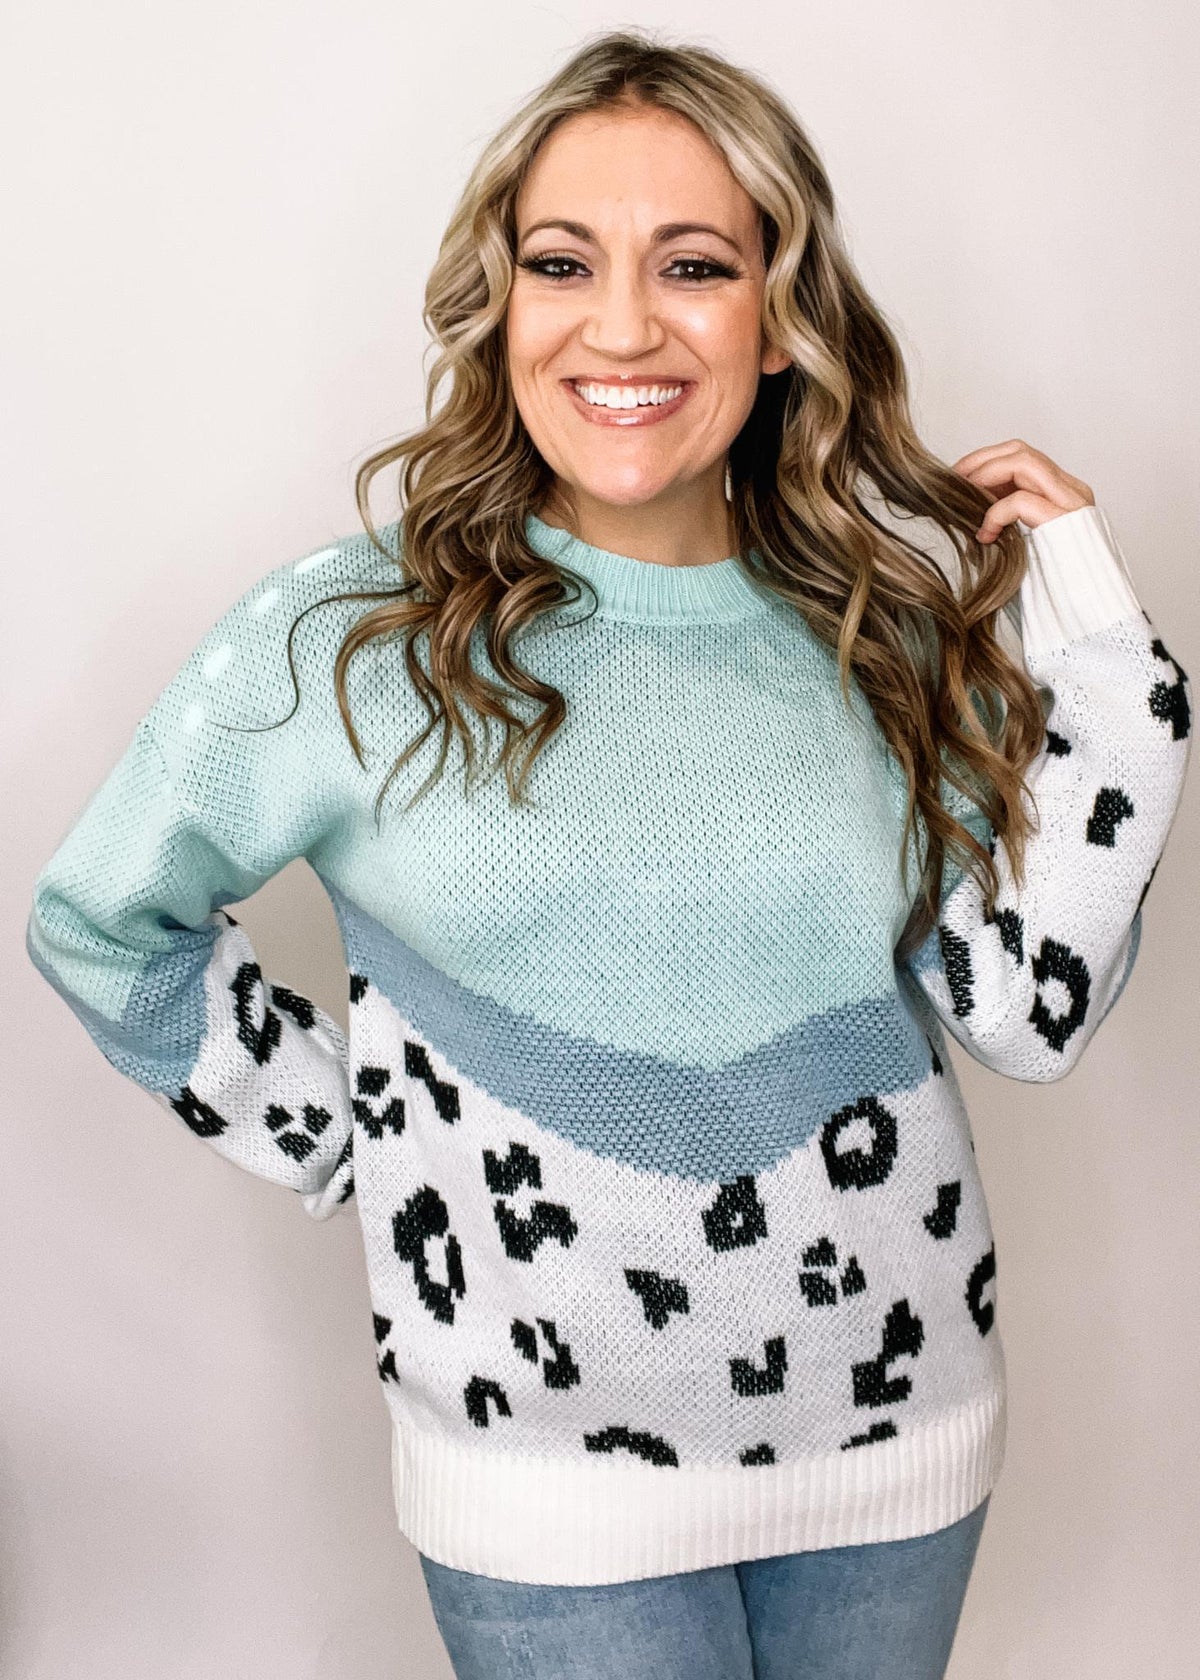 Chevron Mint and Leopard Colorblock Sweater